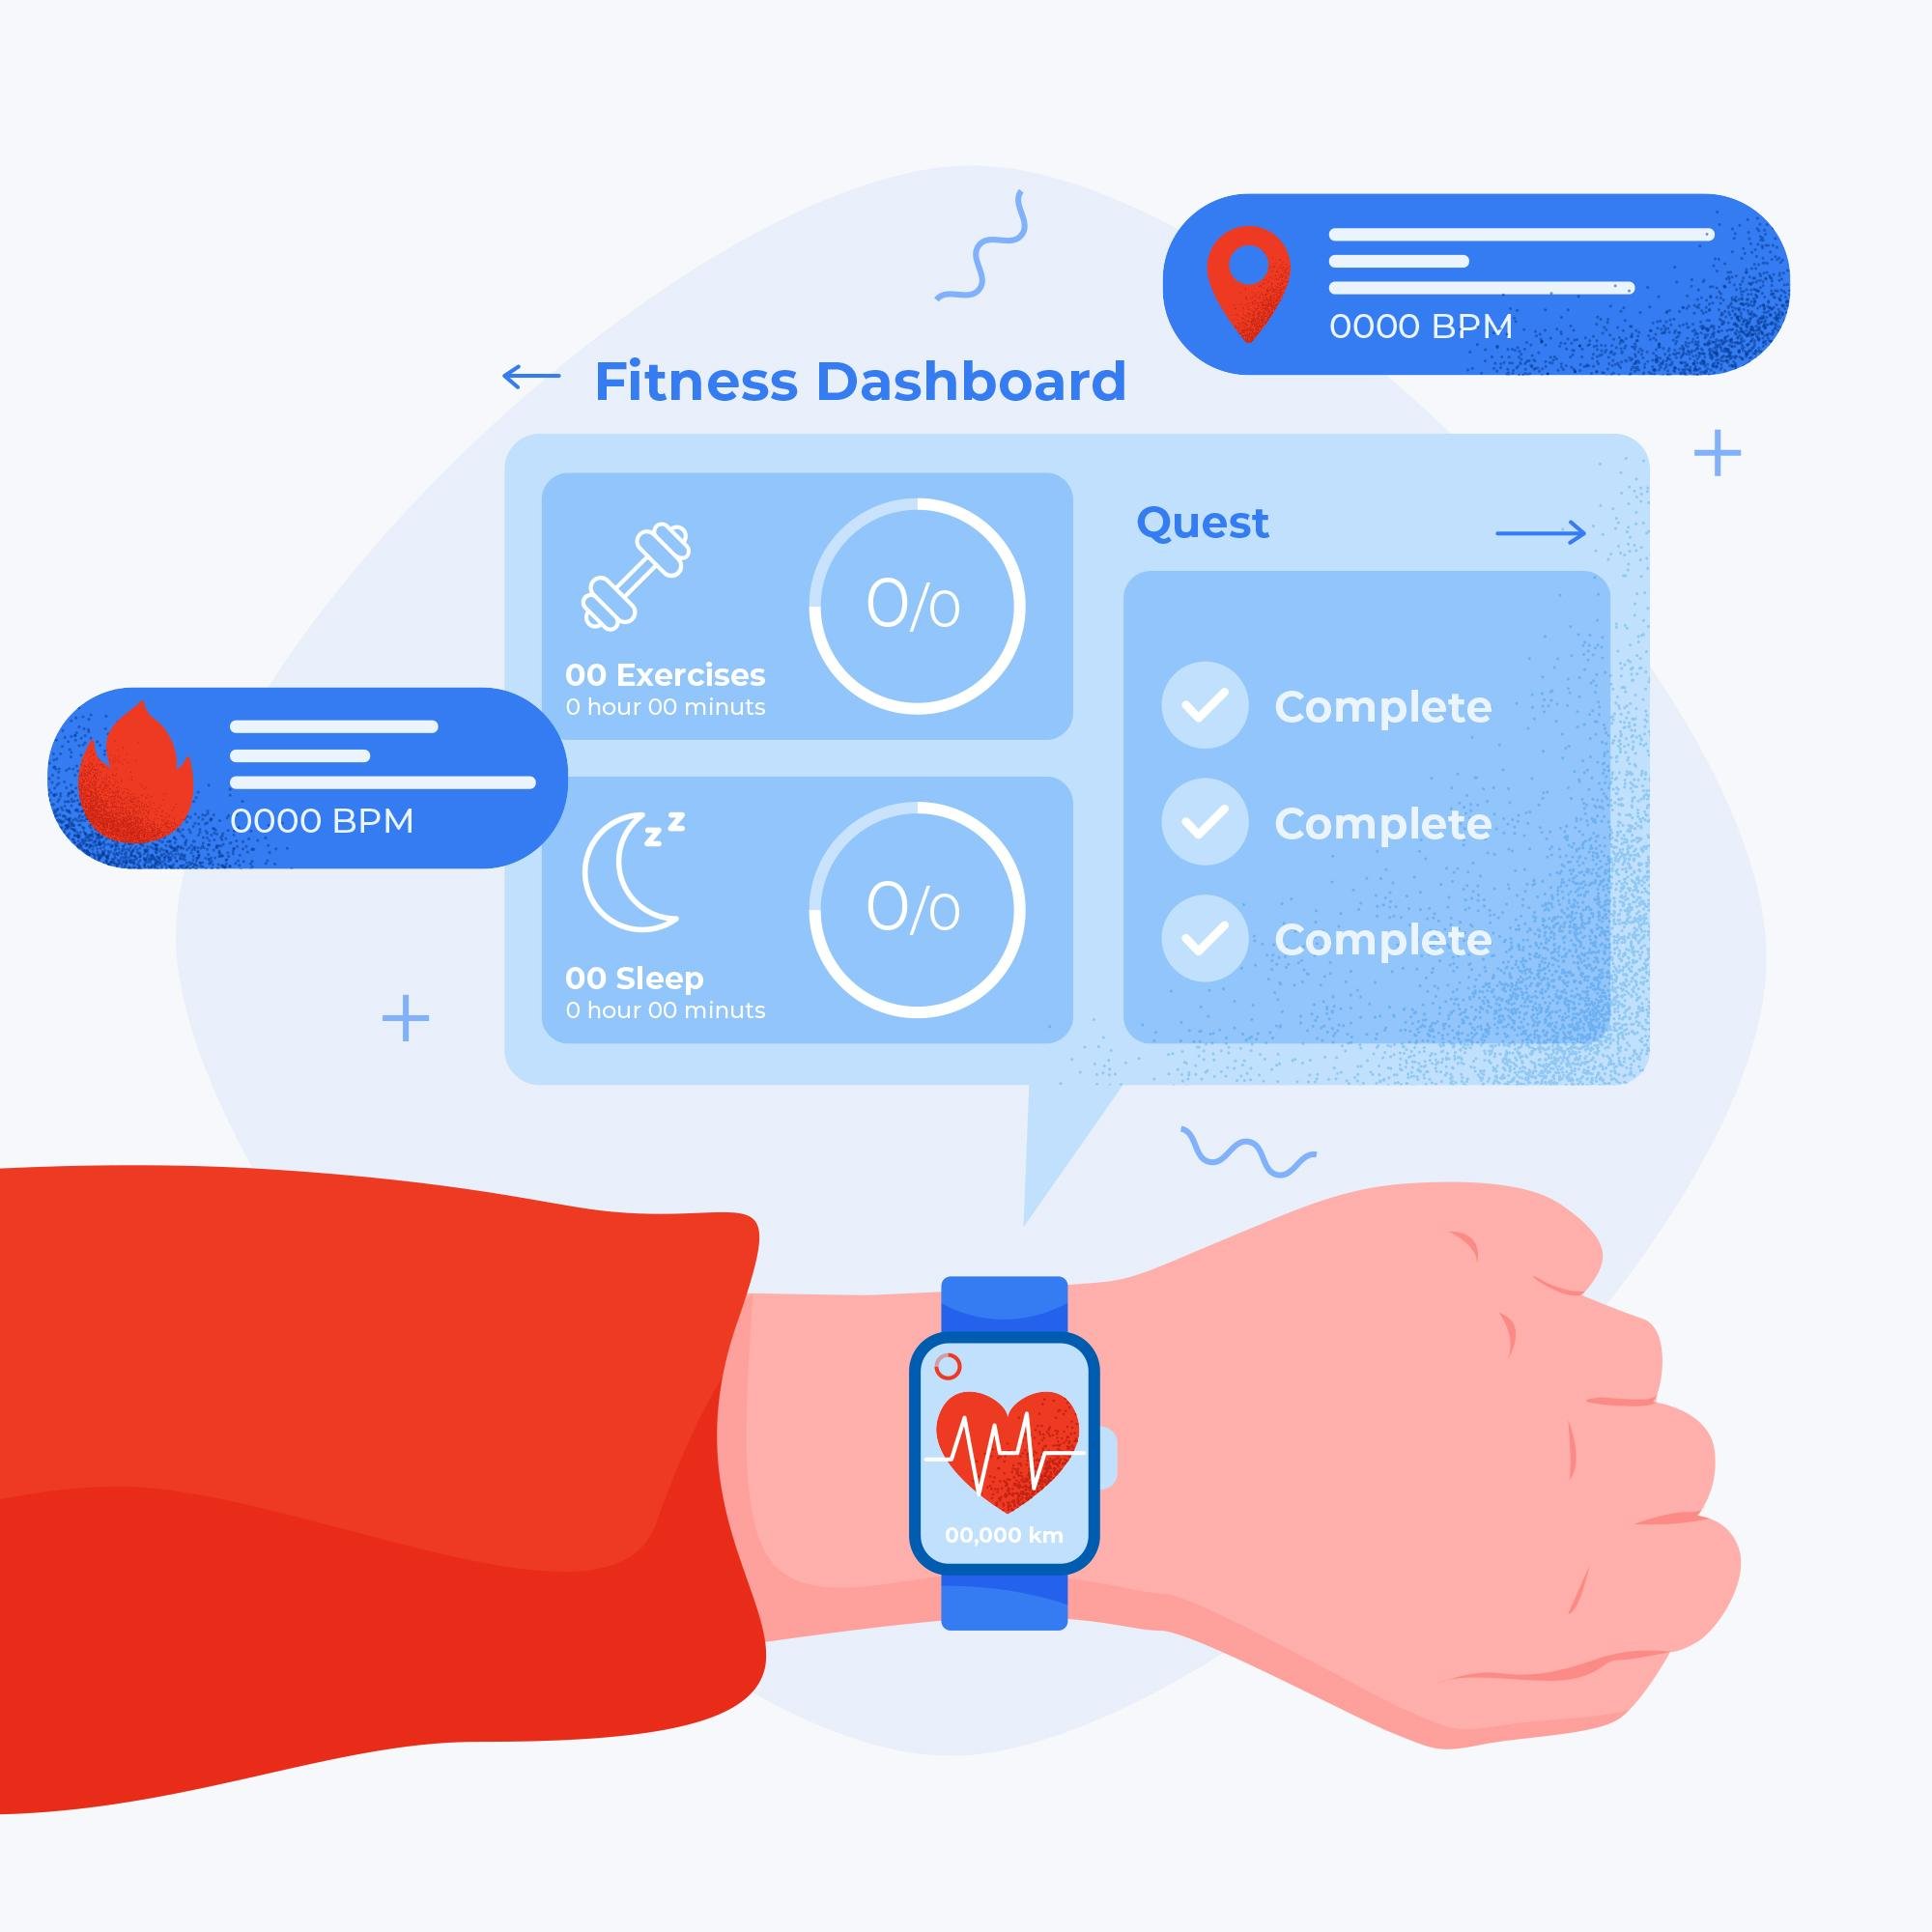 What is BPM in Smartwatch